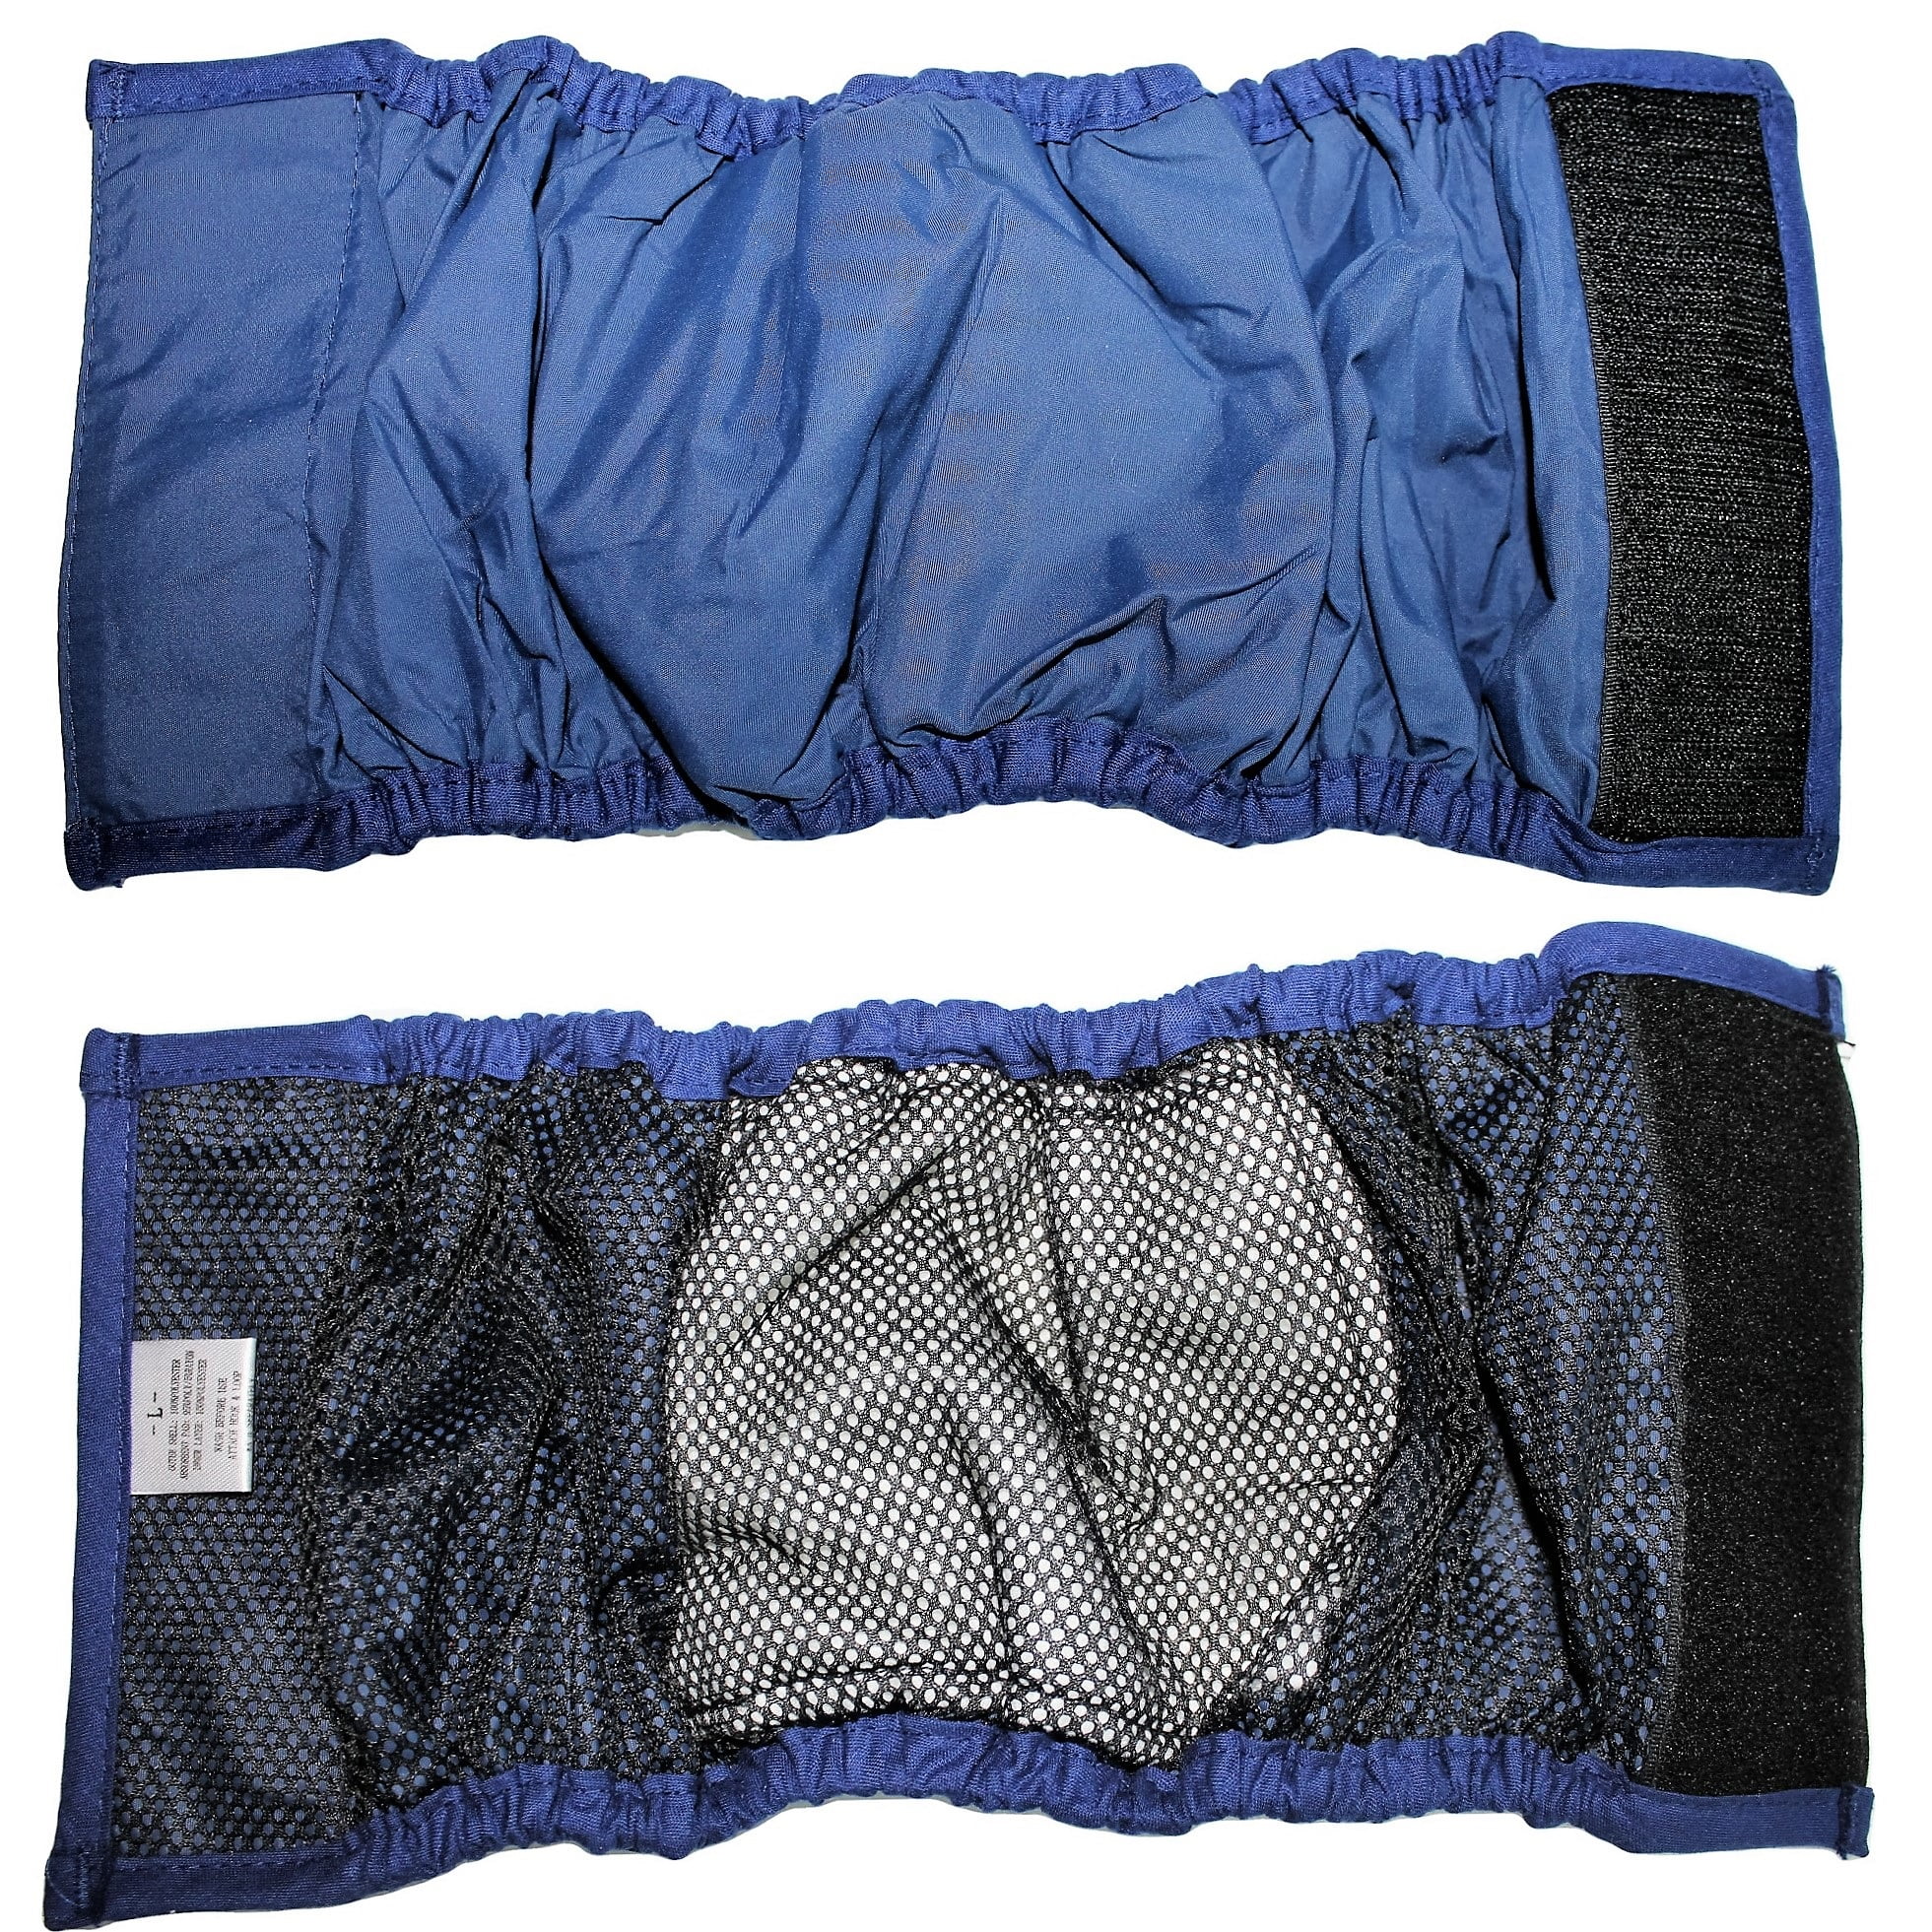 3 Pack Male NAVY BLUE NYLON Dog Diaper Belly Band Wrap 2XL to 7XL 